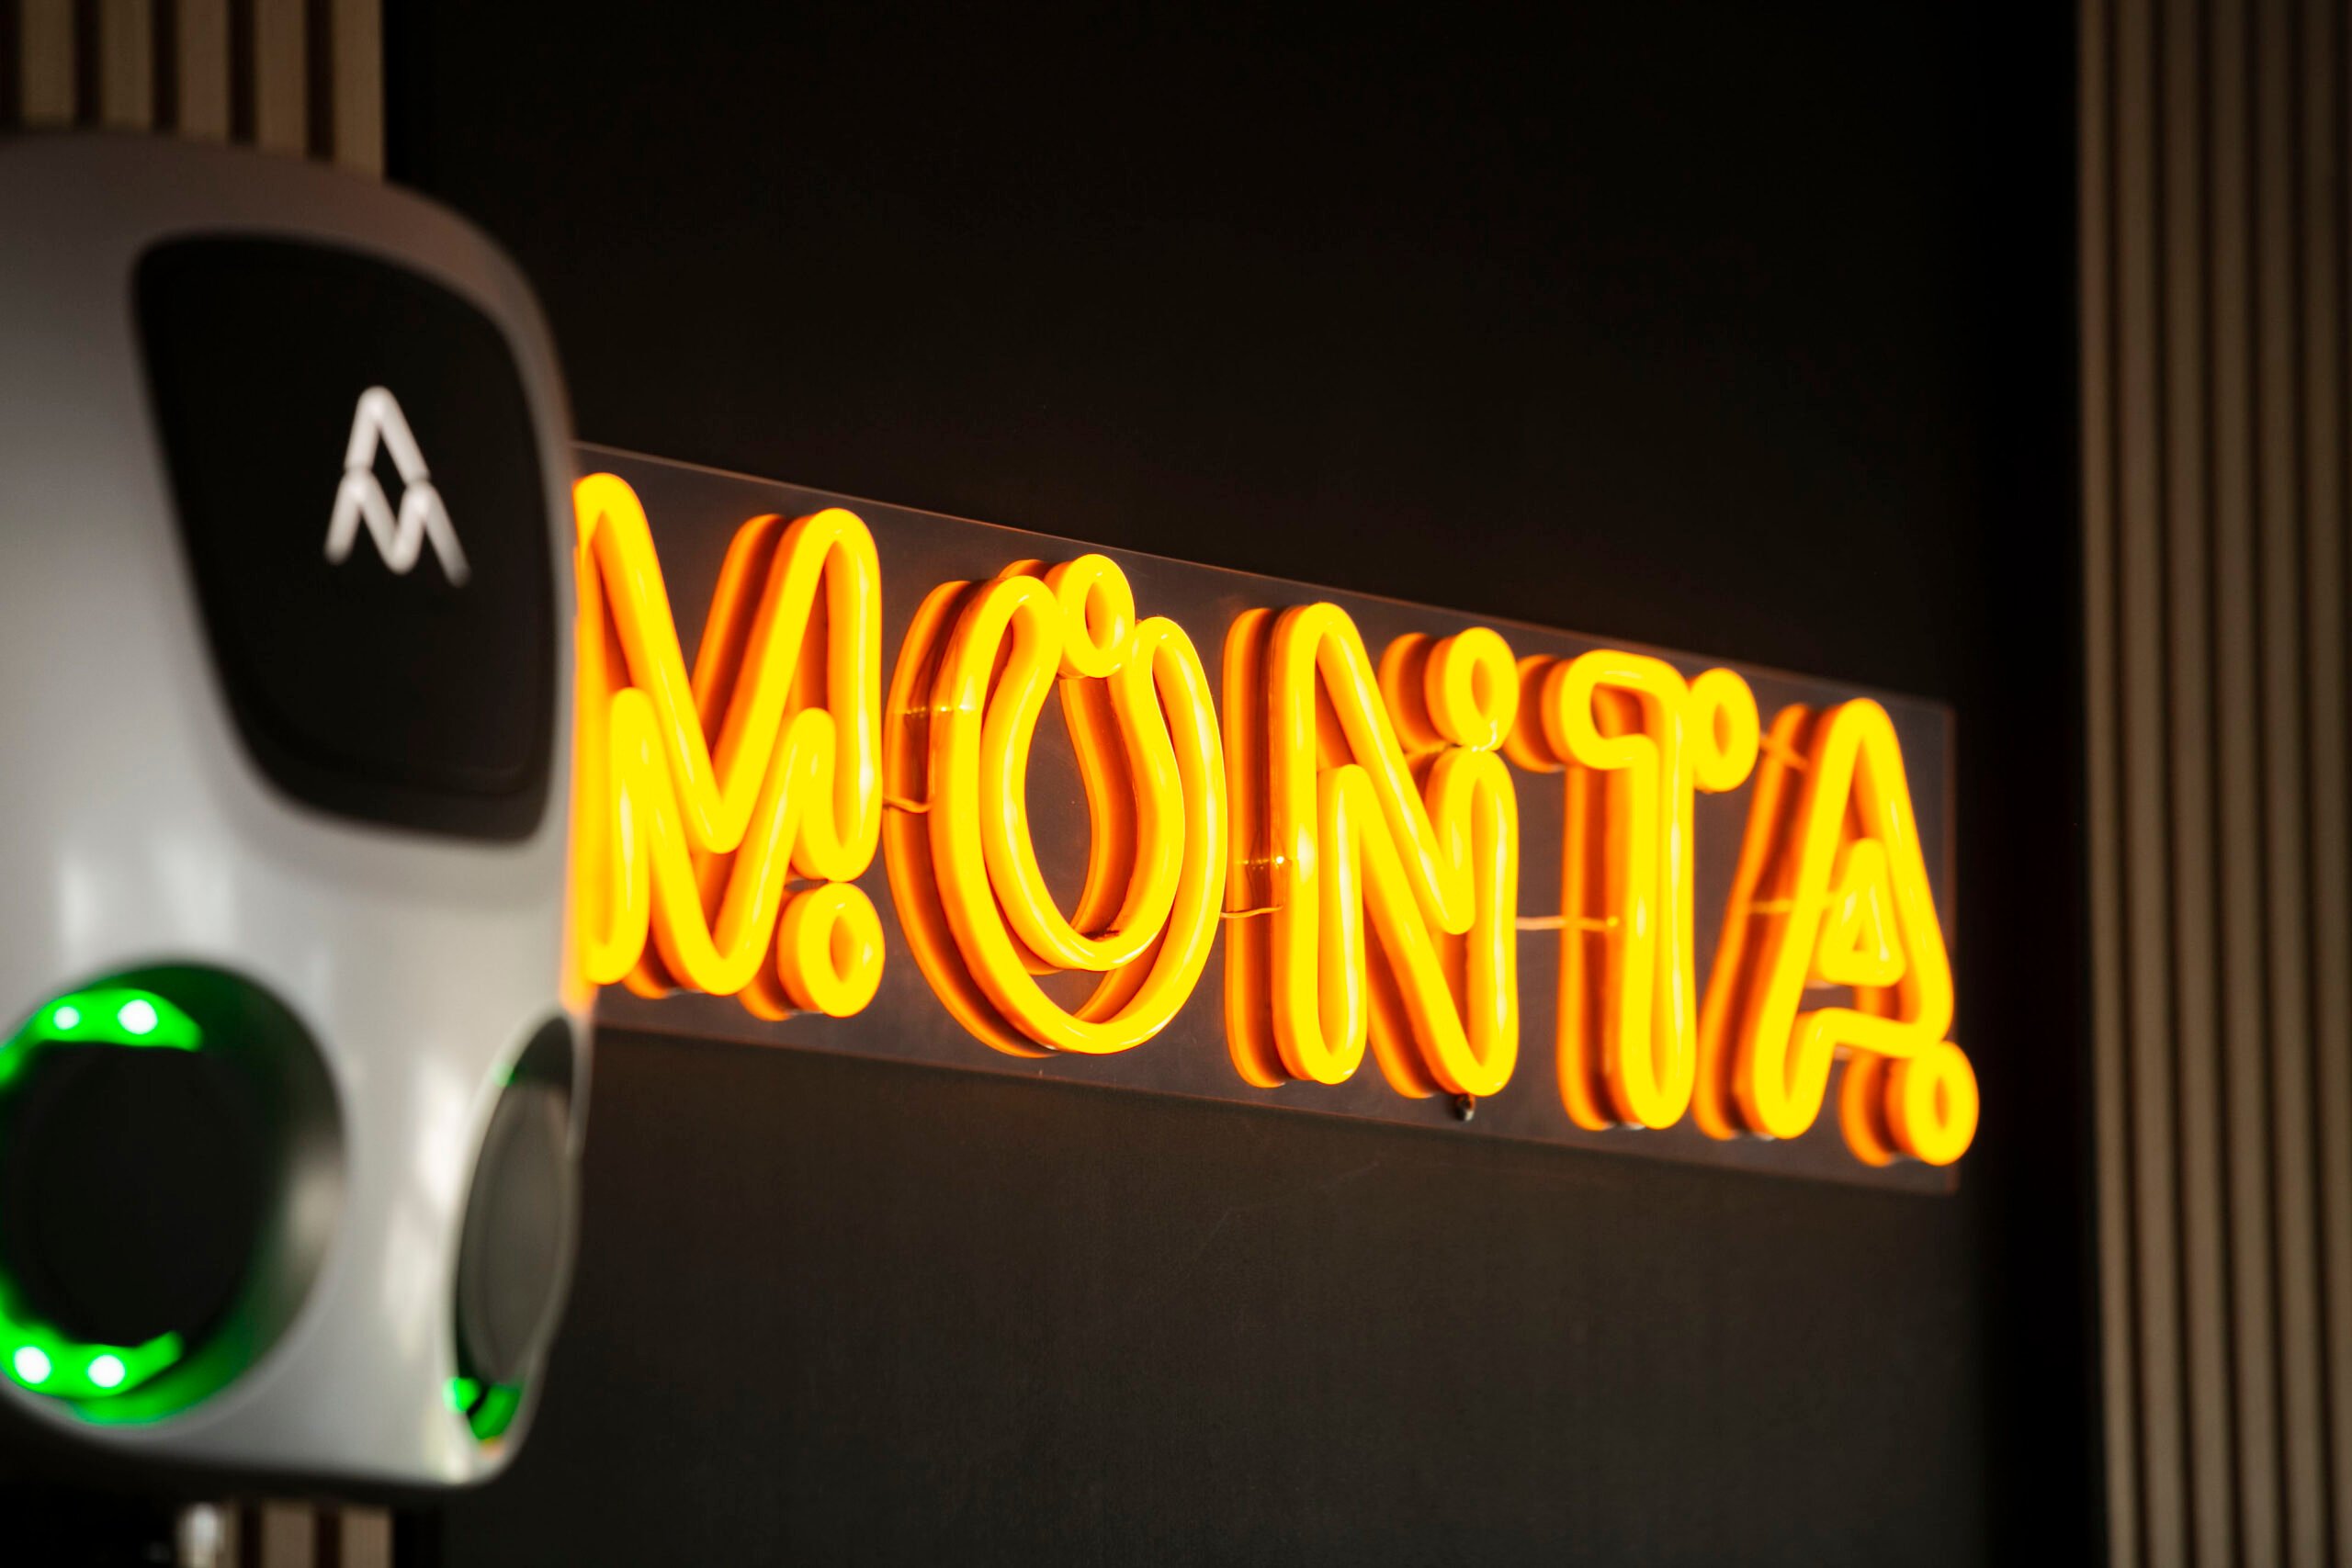 Monta aims to establish an open network of charging points